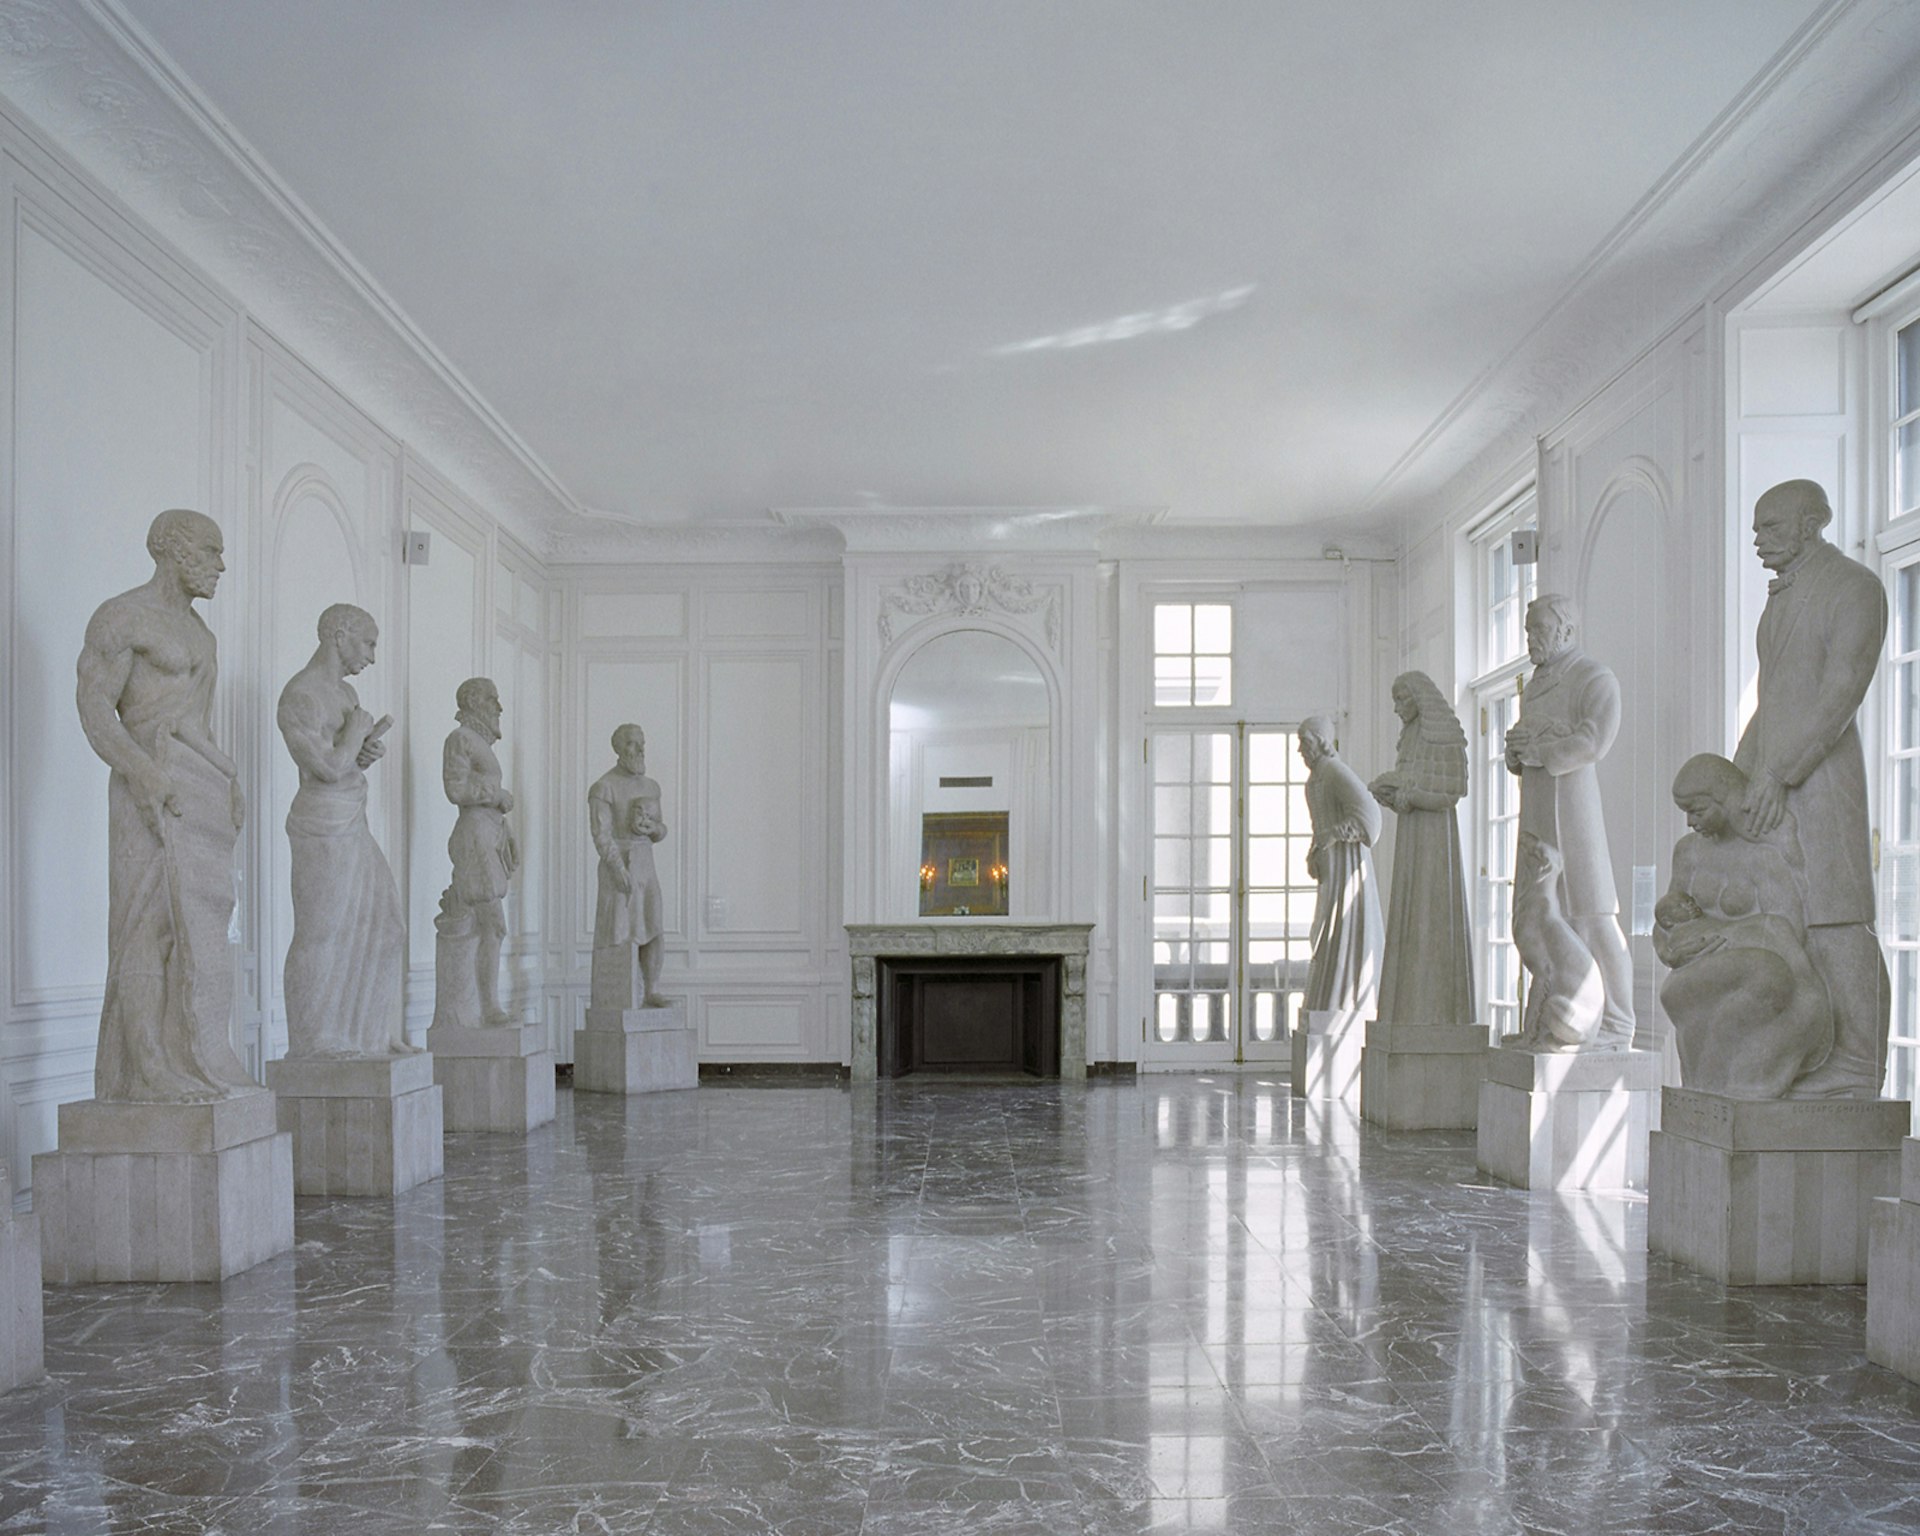 white marble statues of famous medical figures line a room in the Museum of Surgical Science